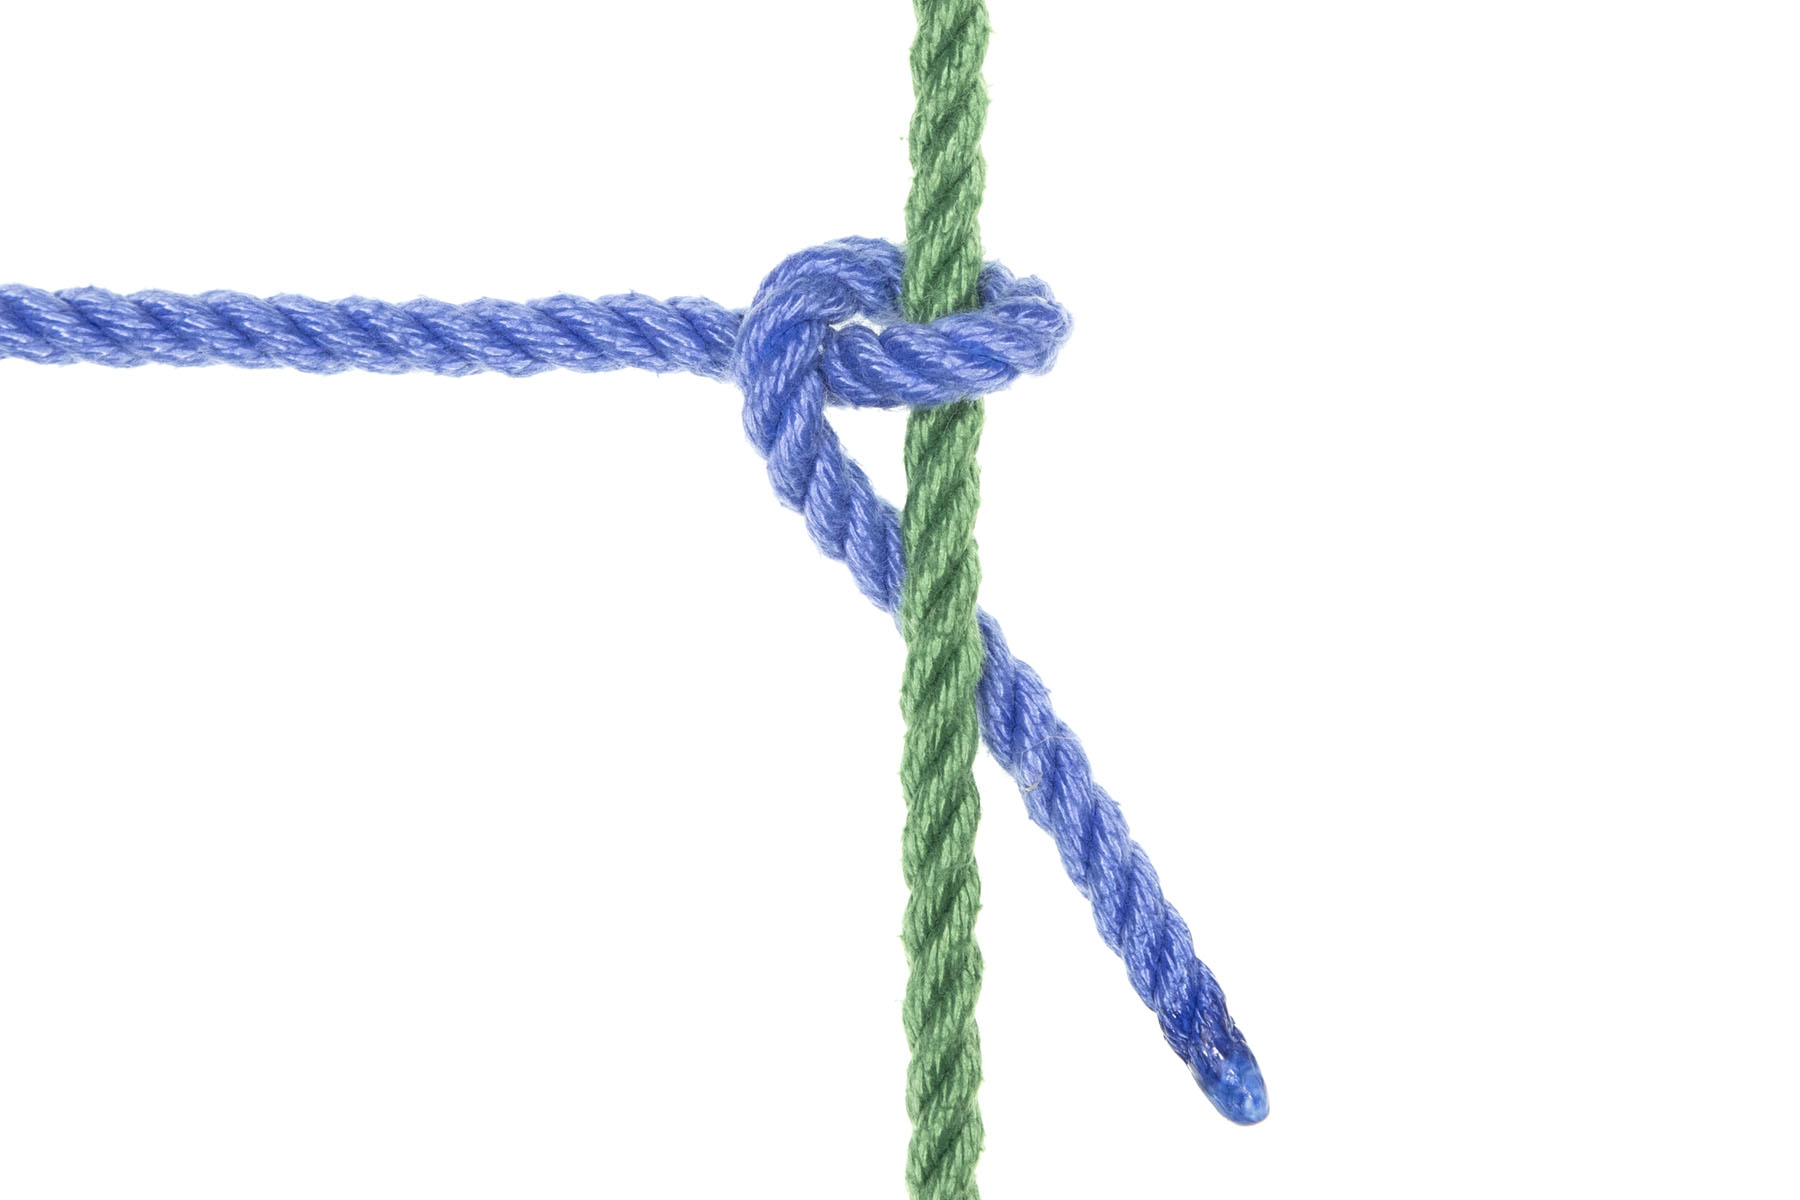 A green rope crosses the frame vertically. A blue rope enters from the left and makes a Munter at the green rope before exiting downward at 45 degrees. This blue rope crosses over the green rope, comes back under the green rope but higher in the frame, then crosses over itself moving downward before going under the green rope again. The 45 degree exit means that the blue rope is being pulled out of the Munter, loosening it.